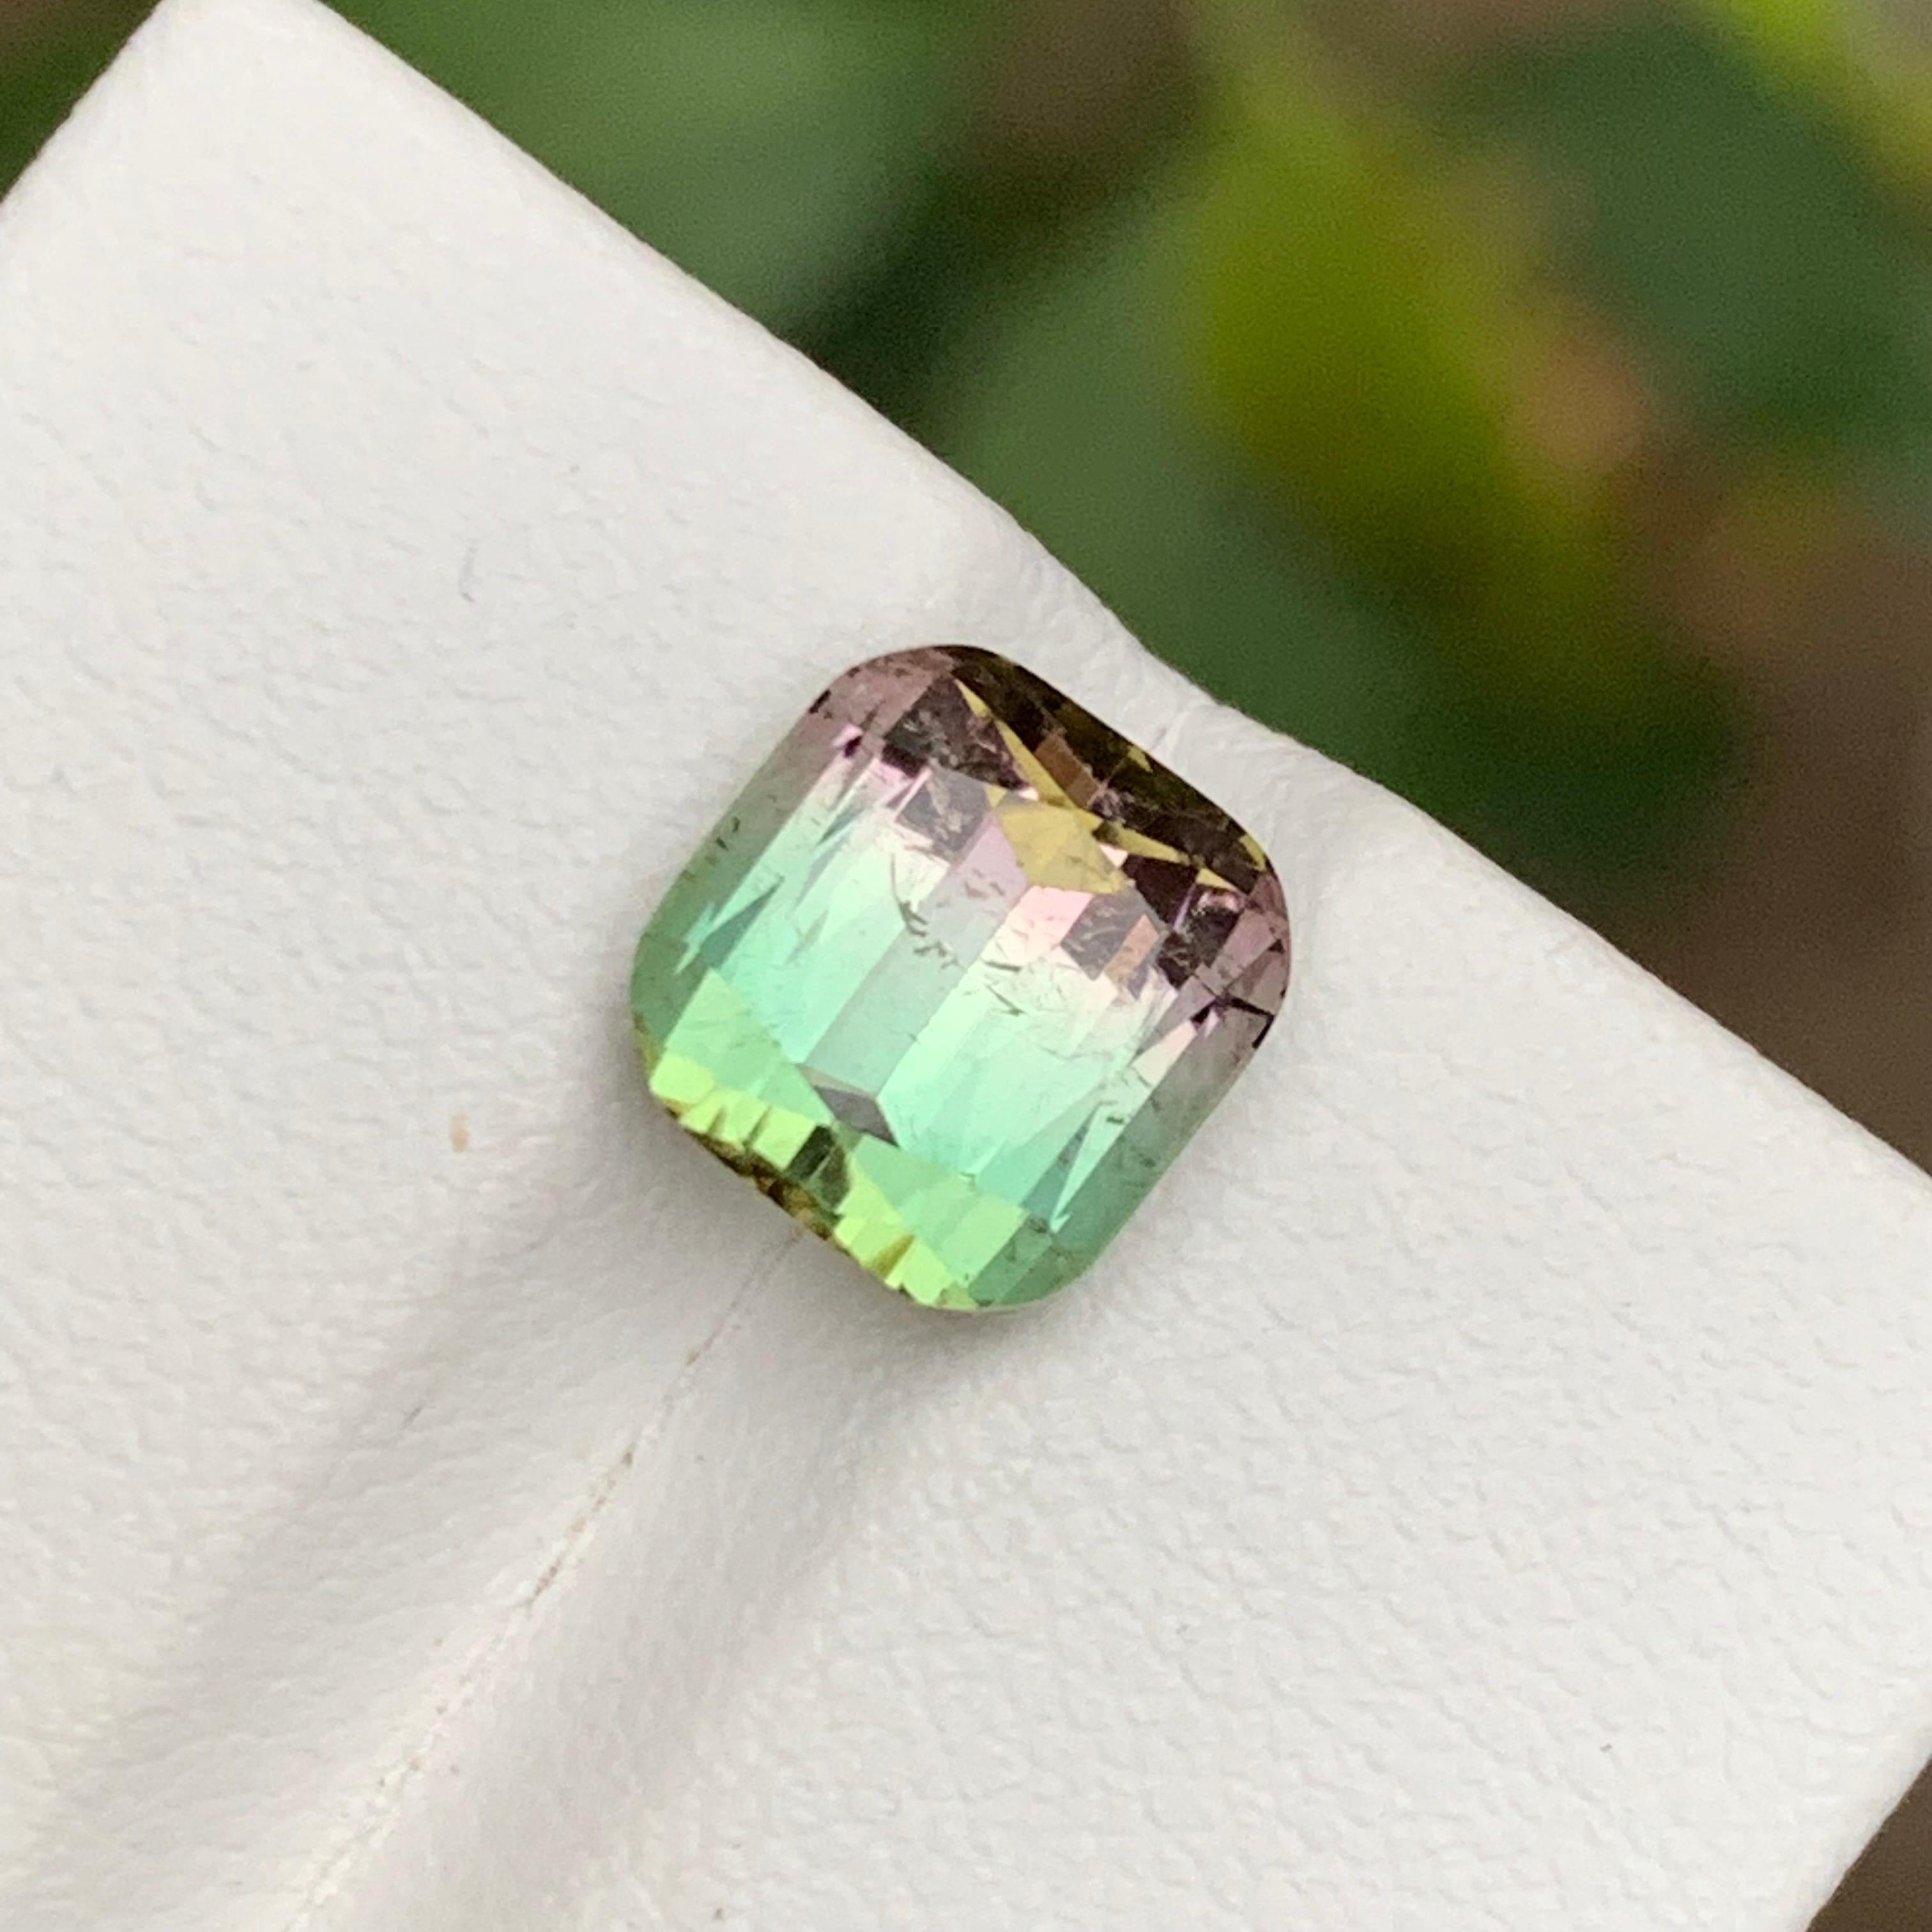 GEMSTONE TYPE: Tourmaline
PIECE(S): 1
WEIGHT: 3.65 Carat
SHAPE: Square Cushion 
SIZE (MM): 8.36 x 8.12 x 6.43
COLOR: Watermelon Bicolor
CLARITY: Slightly Included
TREATMENT: Heated
ORIGIN: Afghanistan
CERTIFICATE: On demand

Truly amazing 3.65 Carat